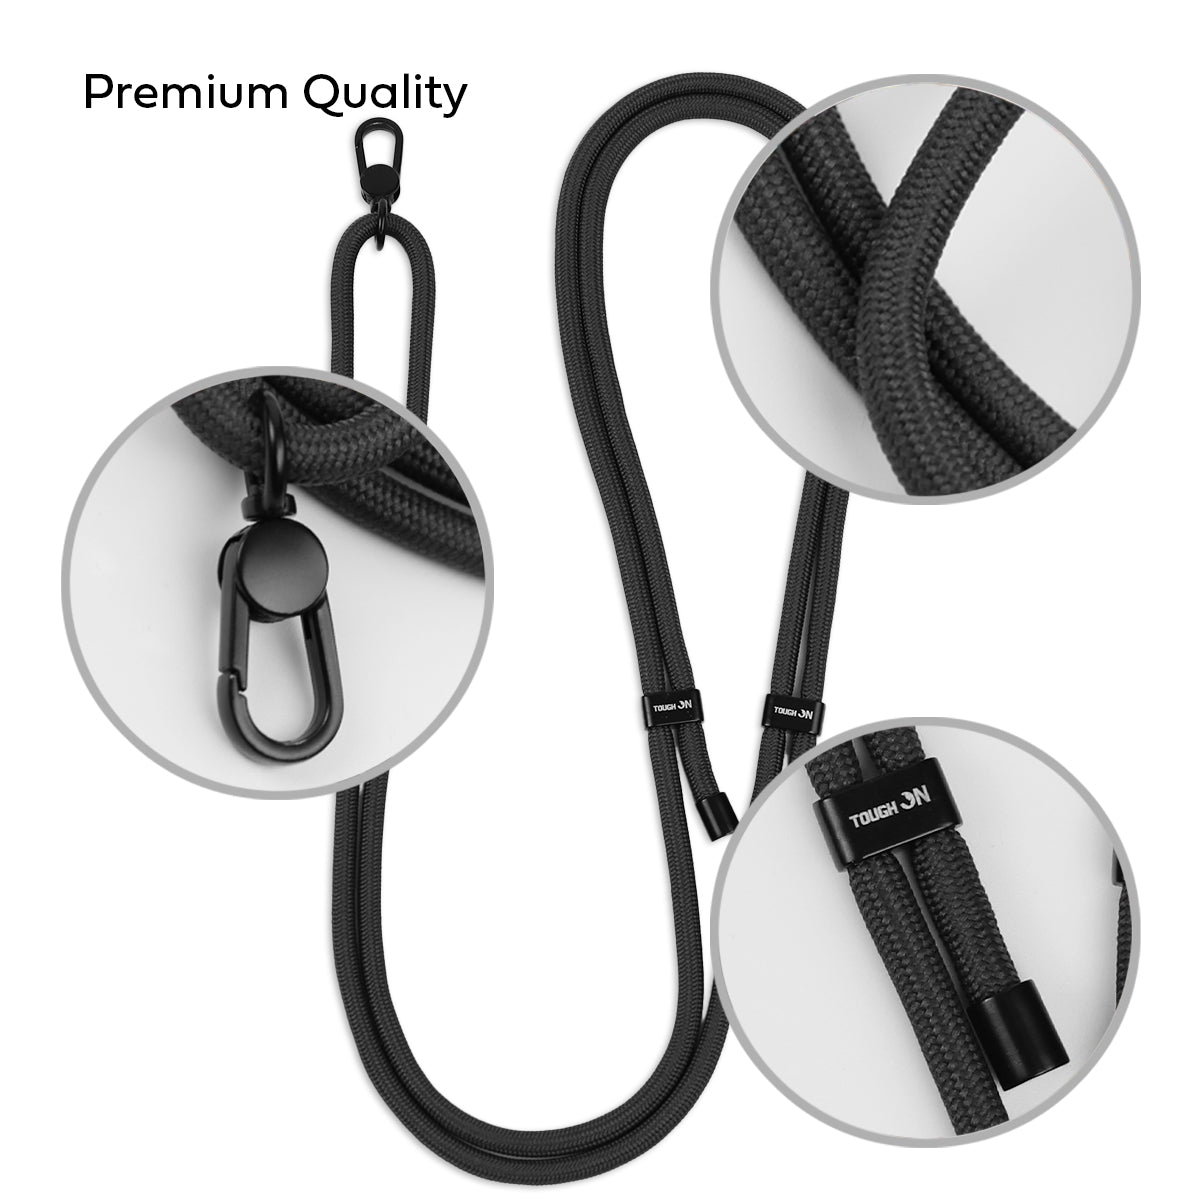 Tough On Rope Phone Strap with Card Crossbody Phone Lanyard